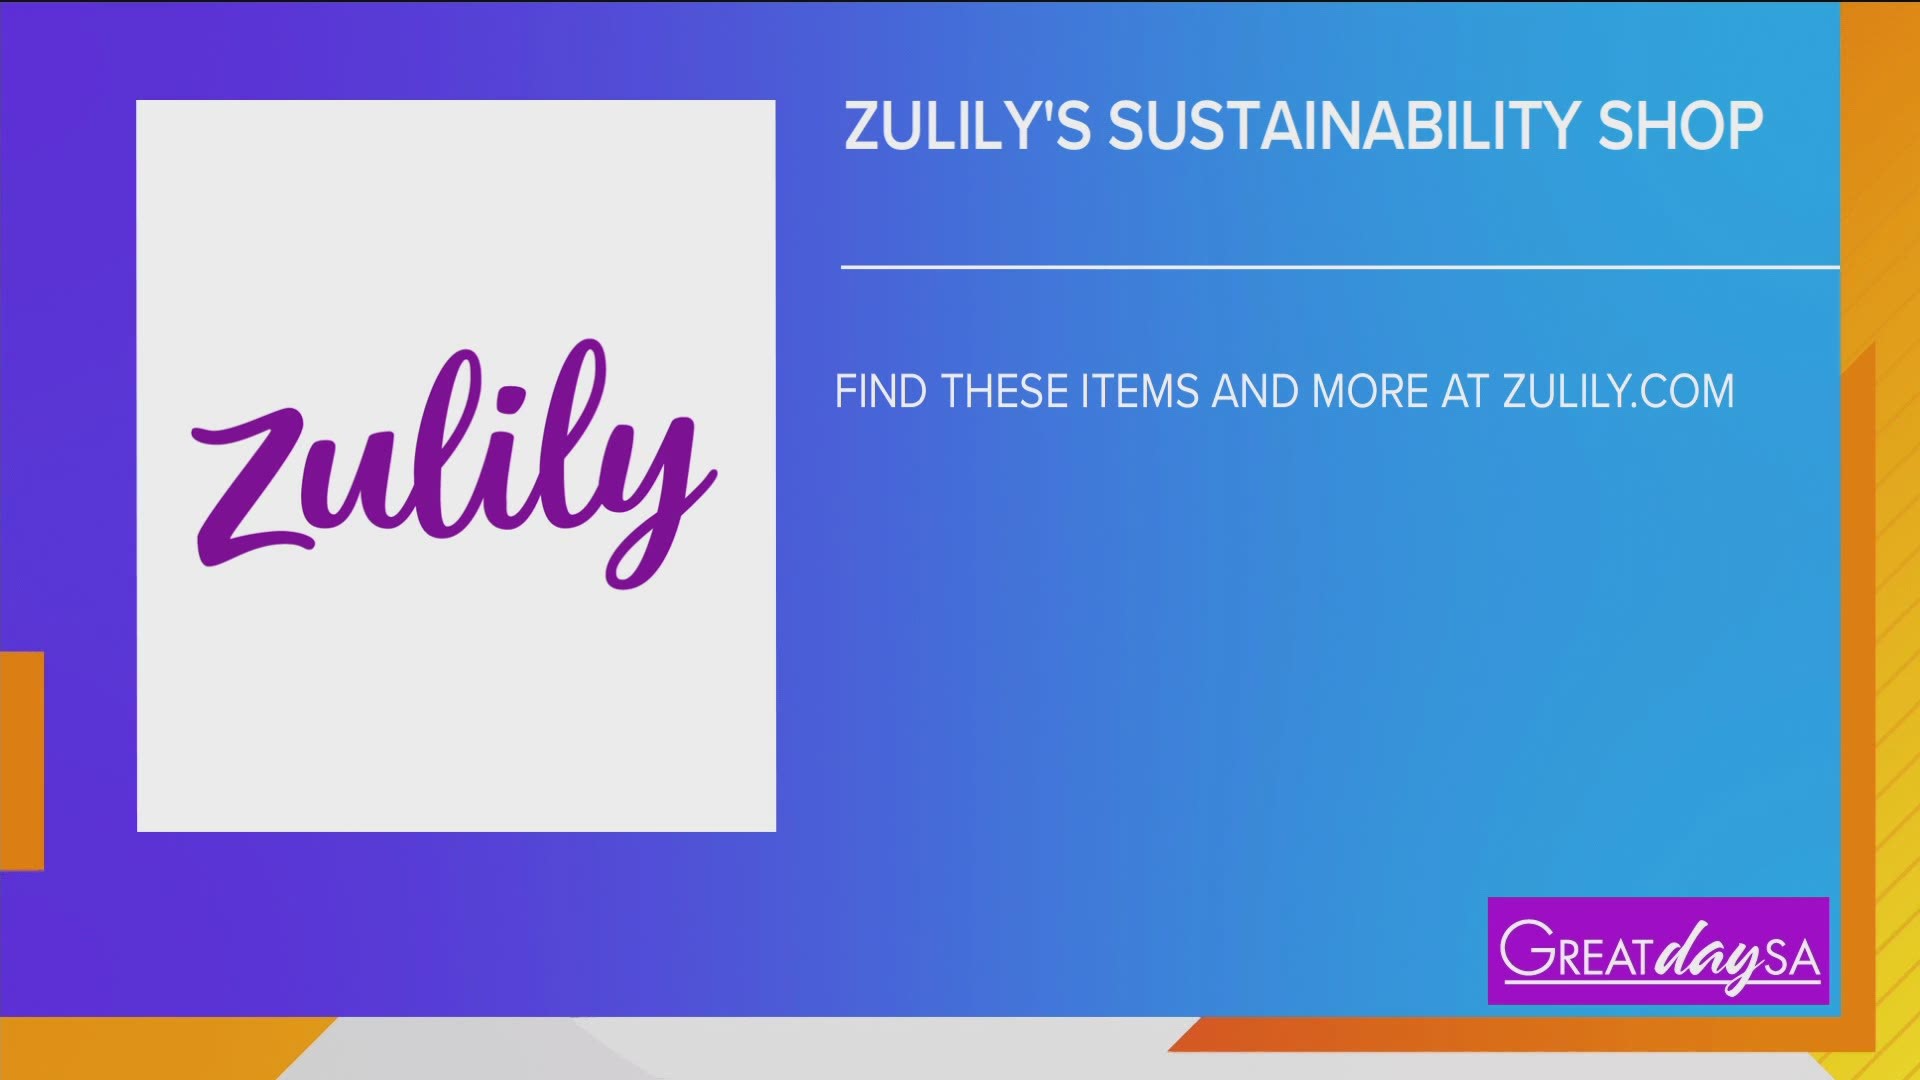 If you're trying to make more earth-friendly purchases, Zulily.com has you covered.